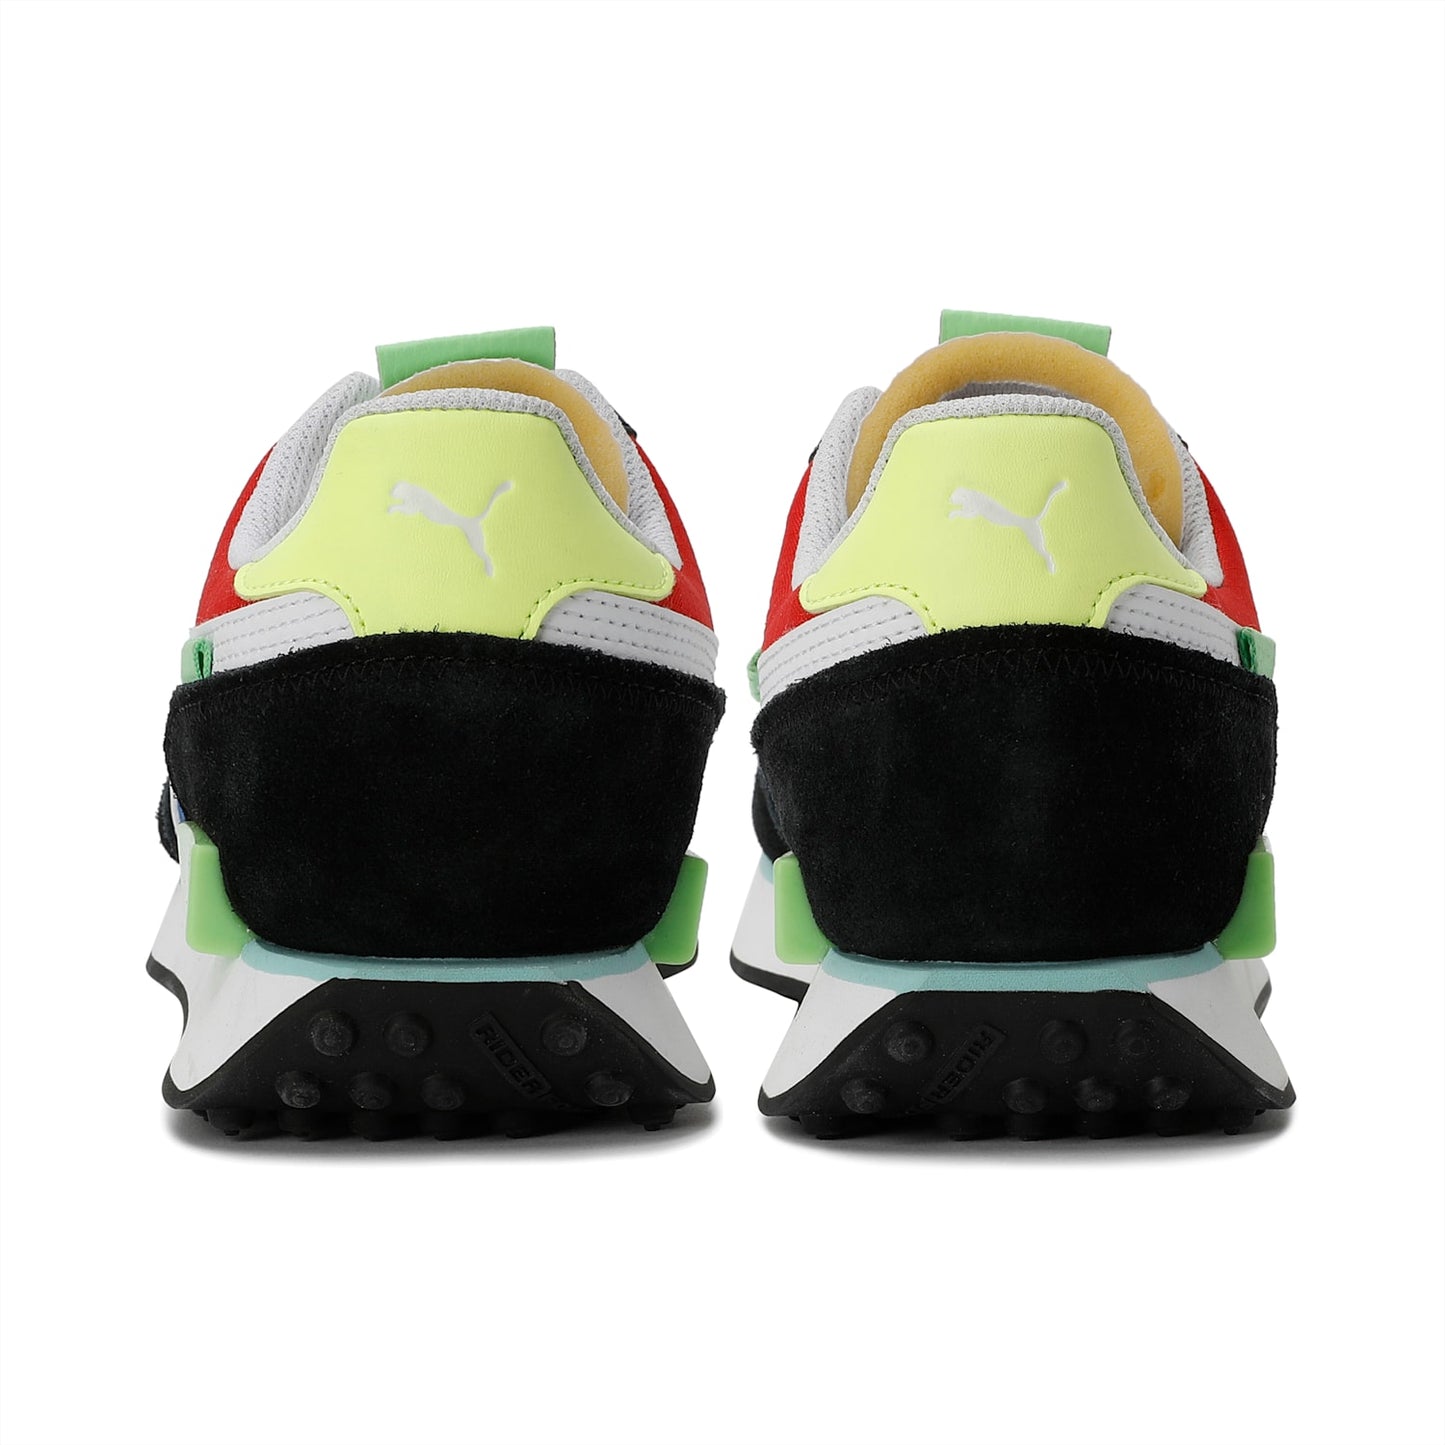 Future Rider Play On Sneakers-37114923